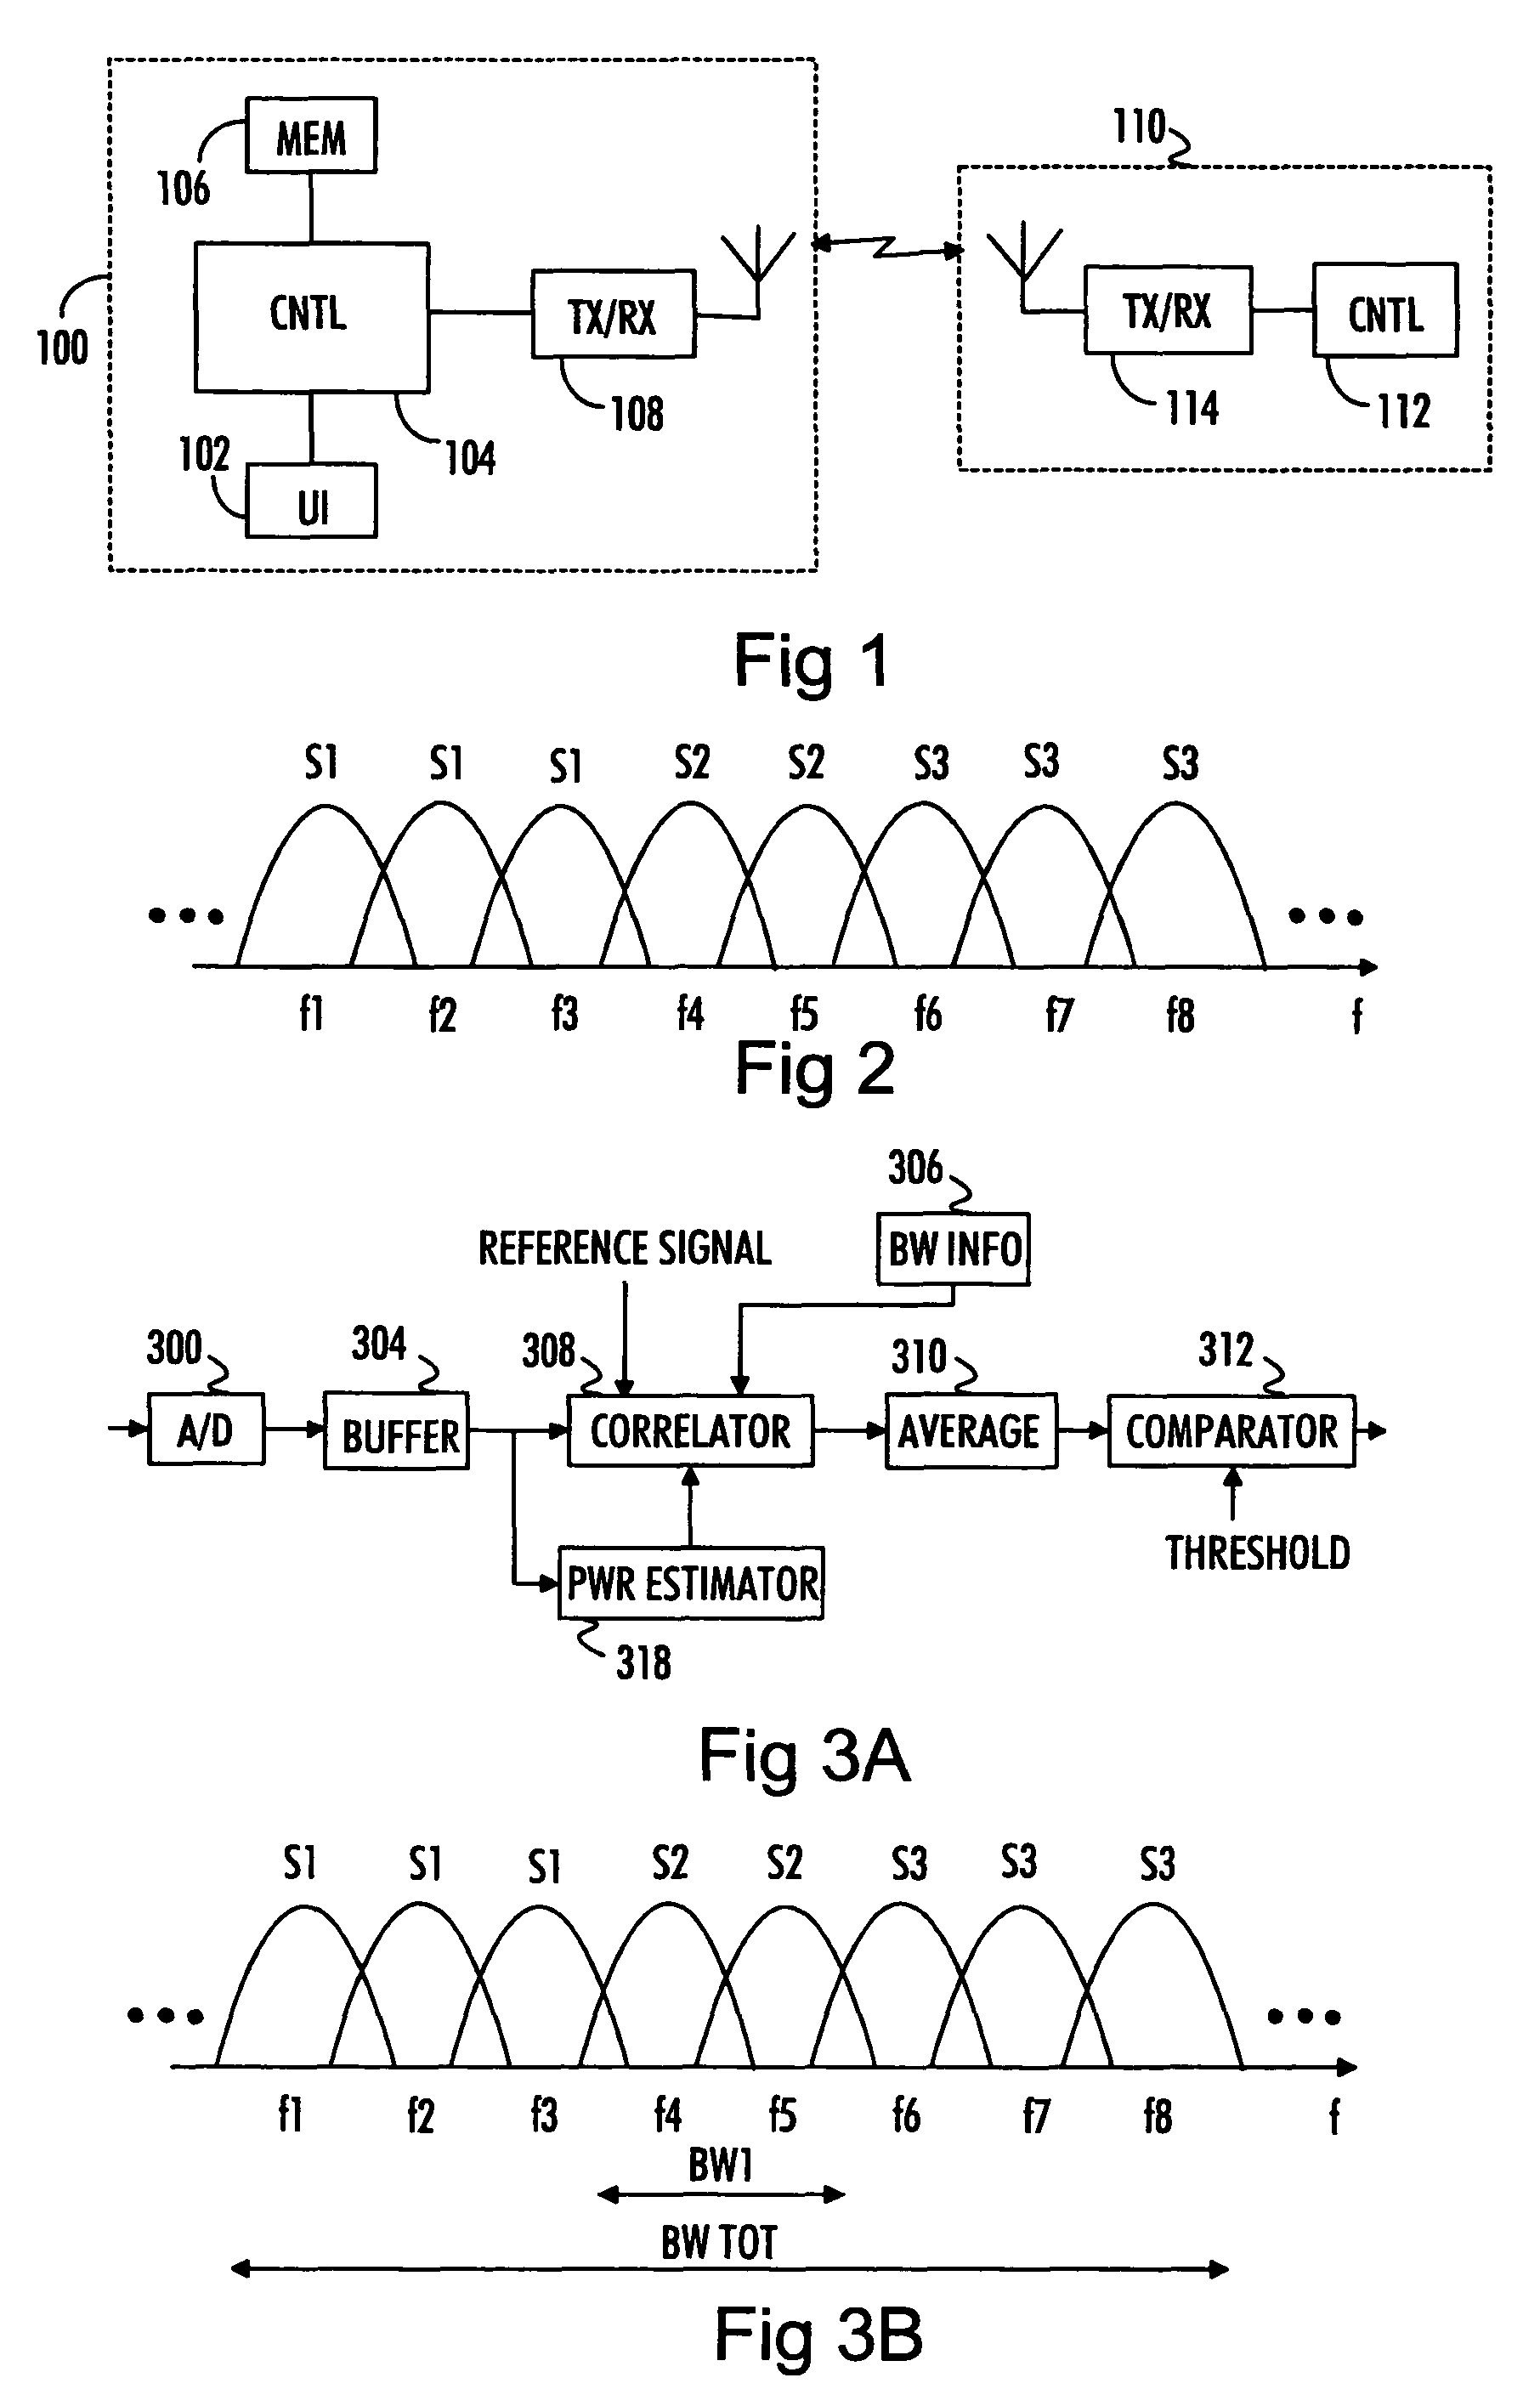 Signal detection in OFDM system